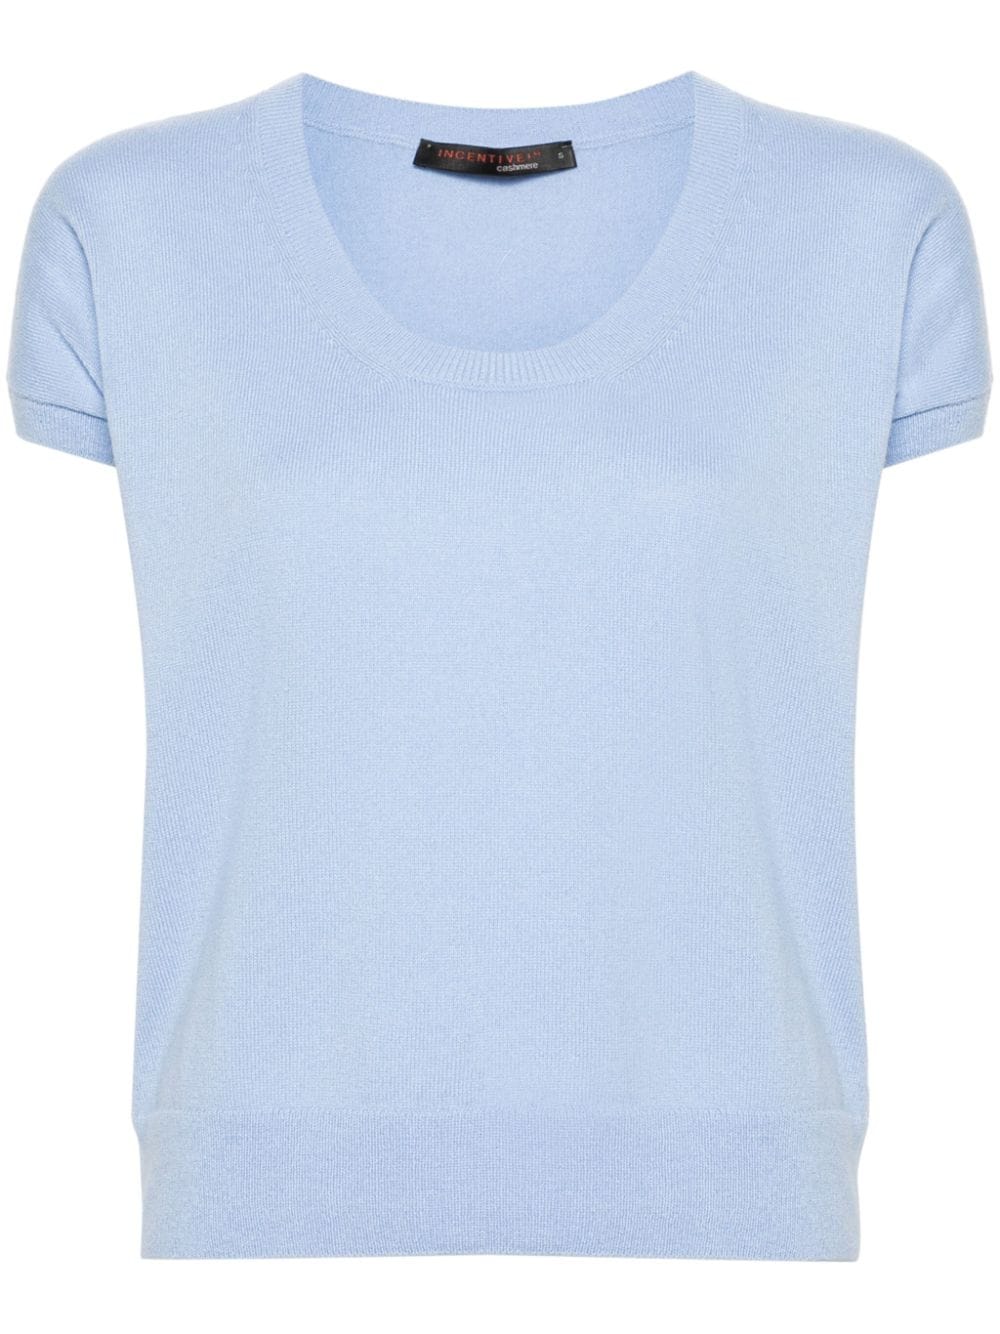 short-sleeve cashmere knitted top